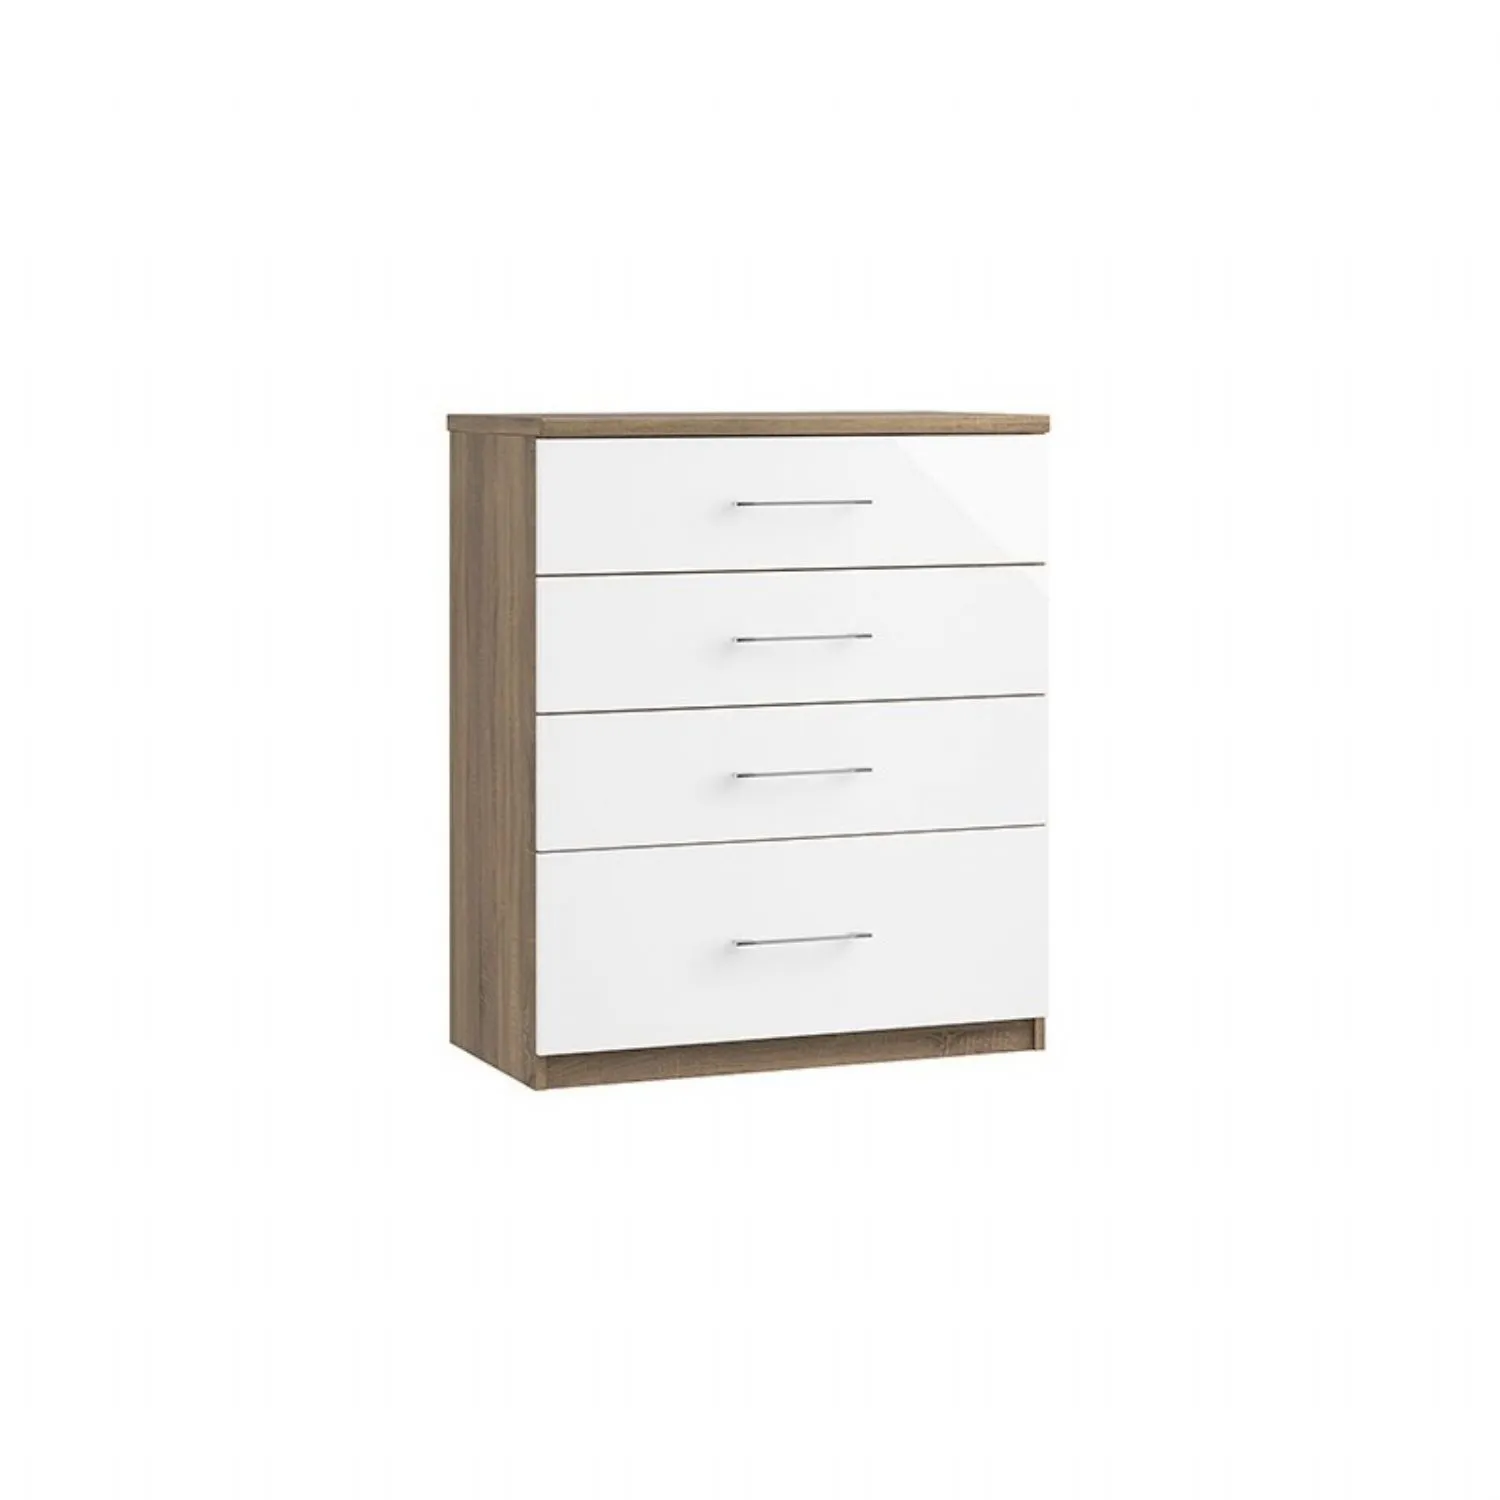 Catalina 4 Drawer with 1 Deep Drawer Chest